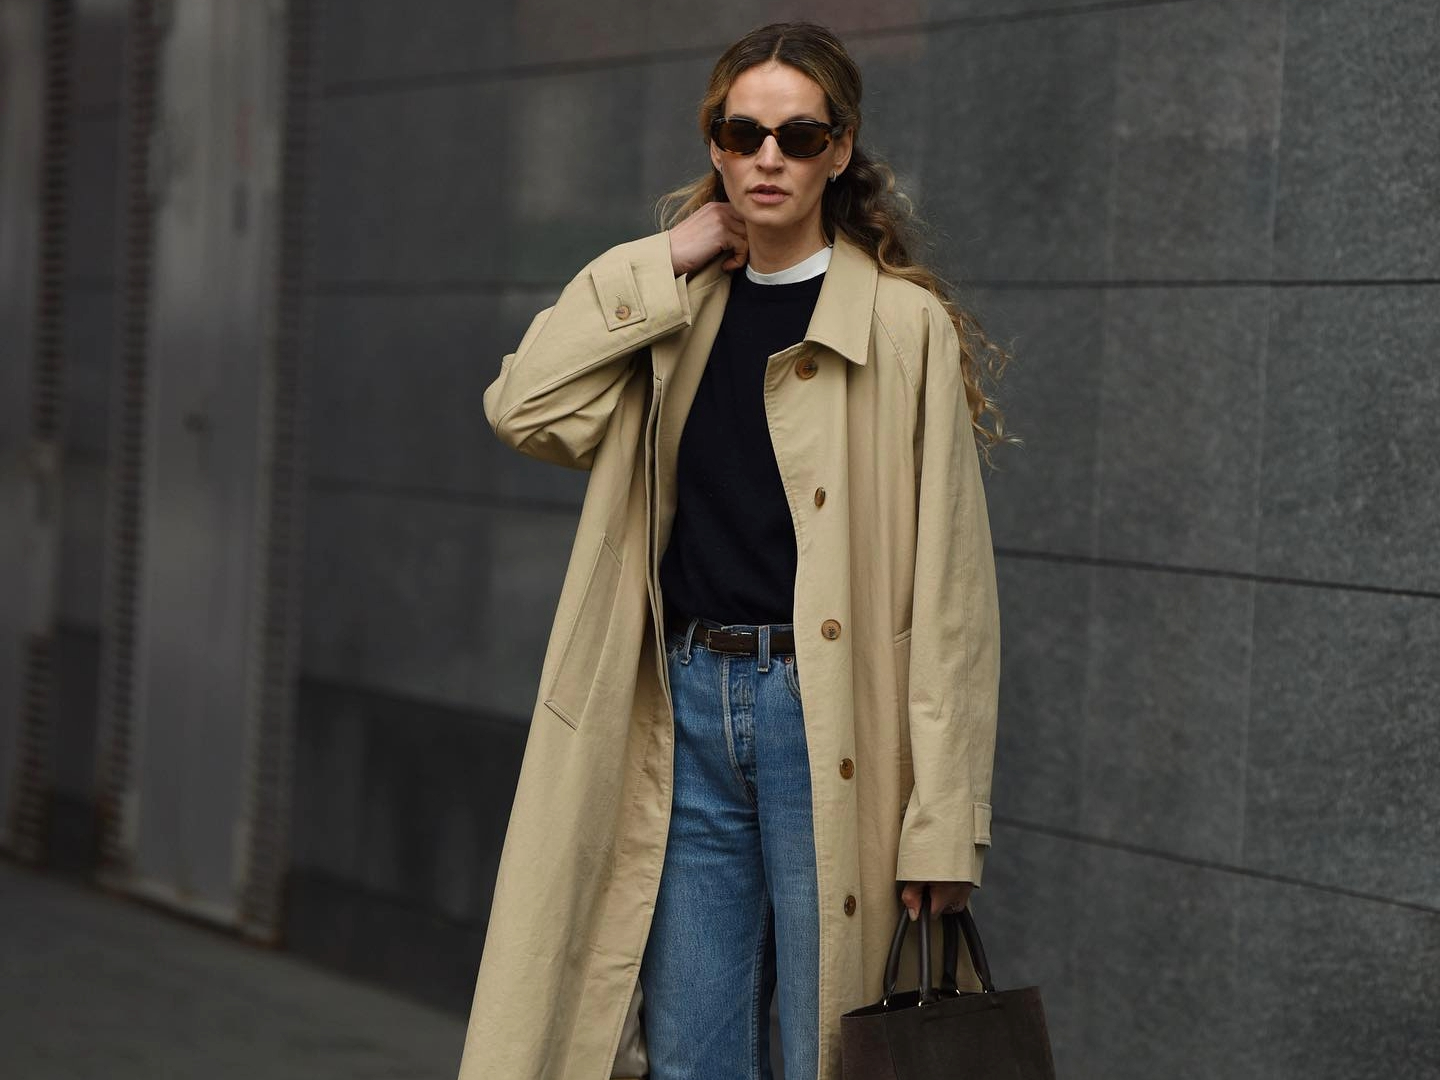 woman wearing khaki trench coat, black sweater, black sunglasses, belt, blue jeans, and carrying brown suede bag